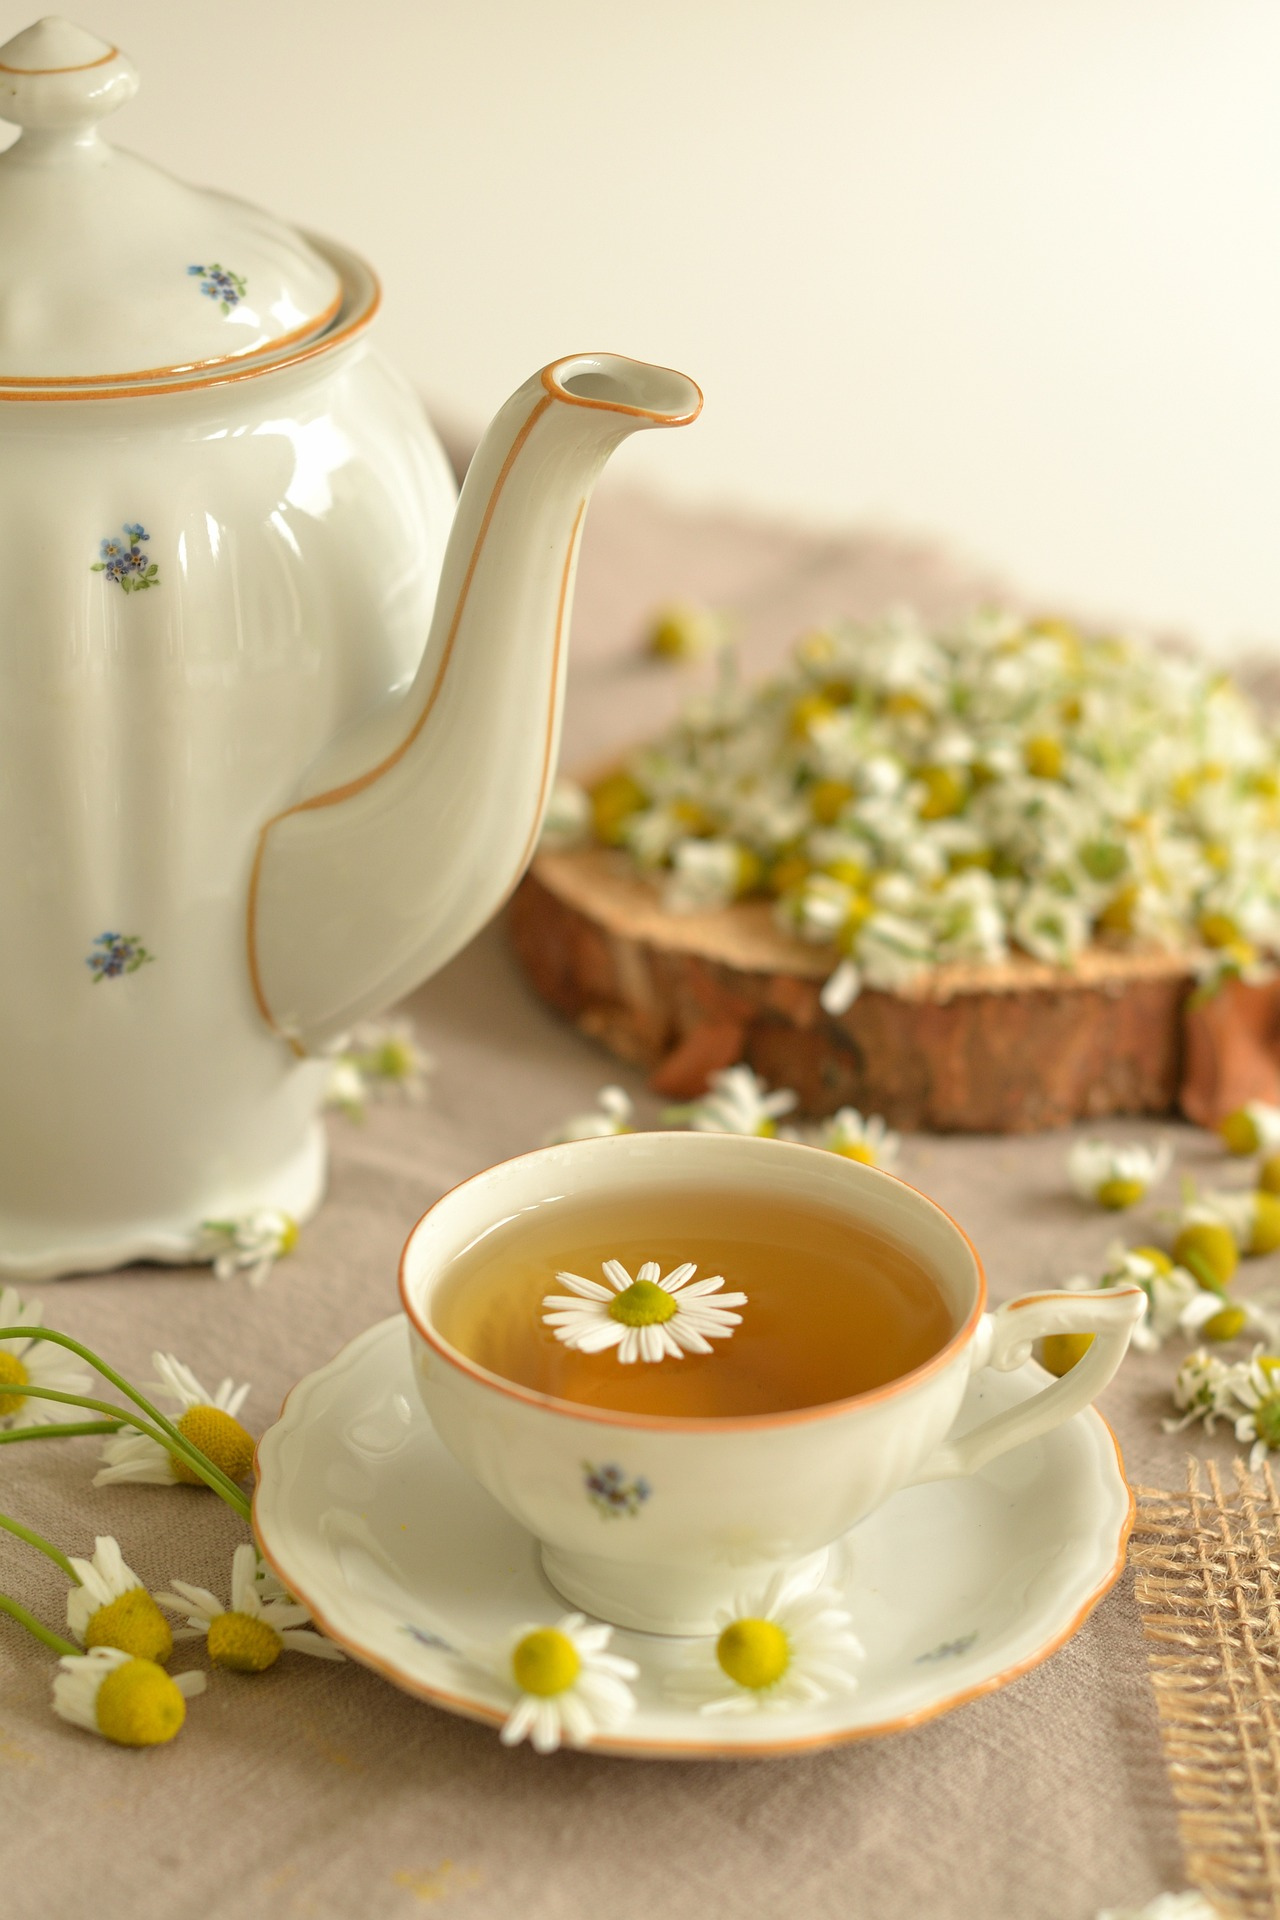 About Chamomile Tea (+ How to Make It)